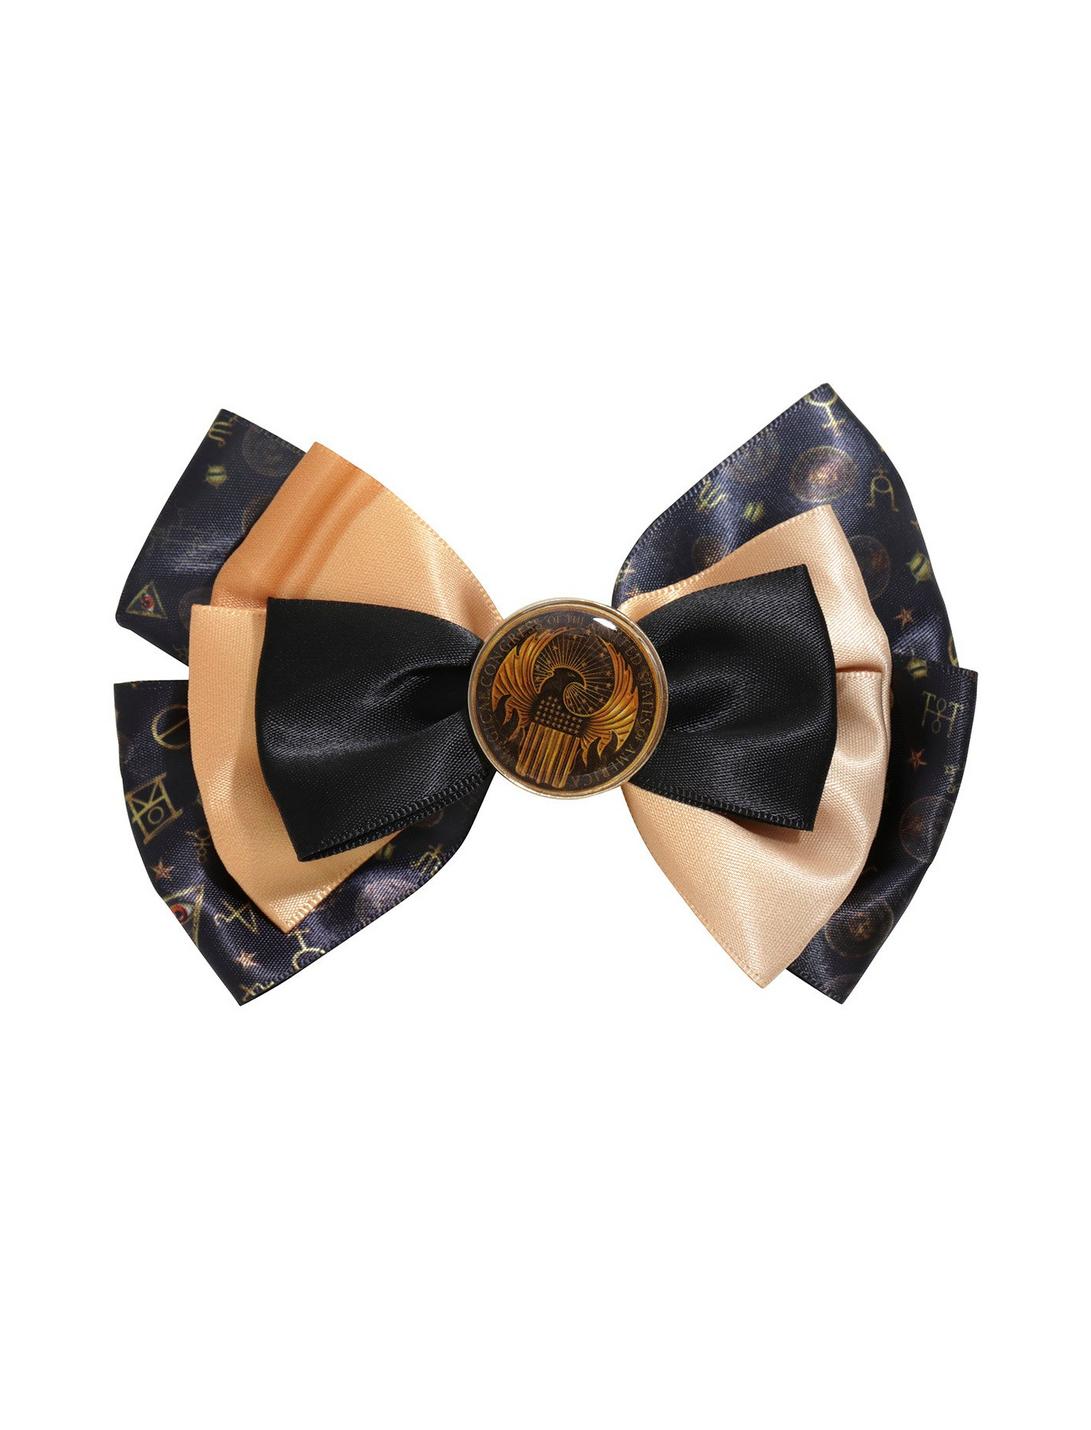 Fantastic Beasts And Where To Find Them MACUSA Cosplay Hair Bow, , hi-res